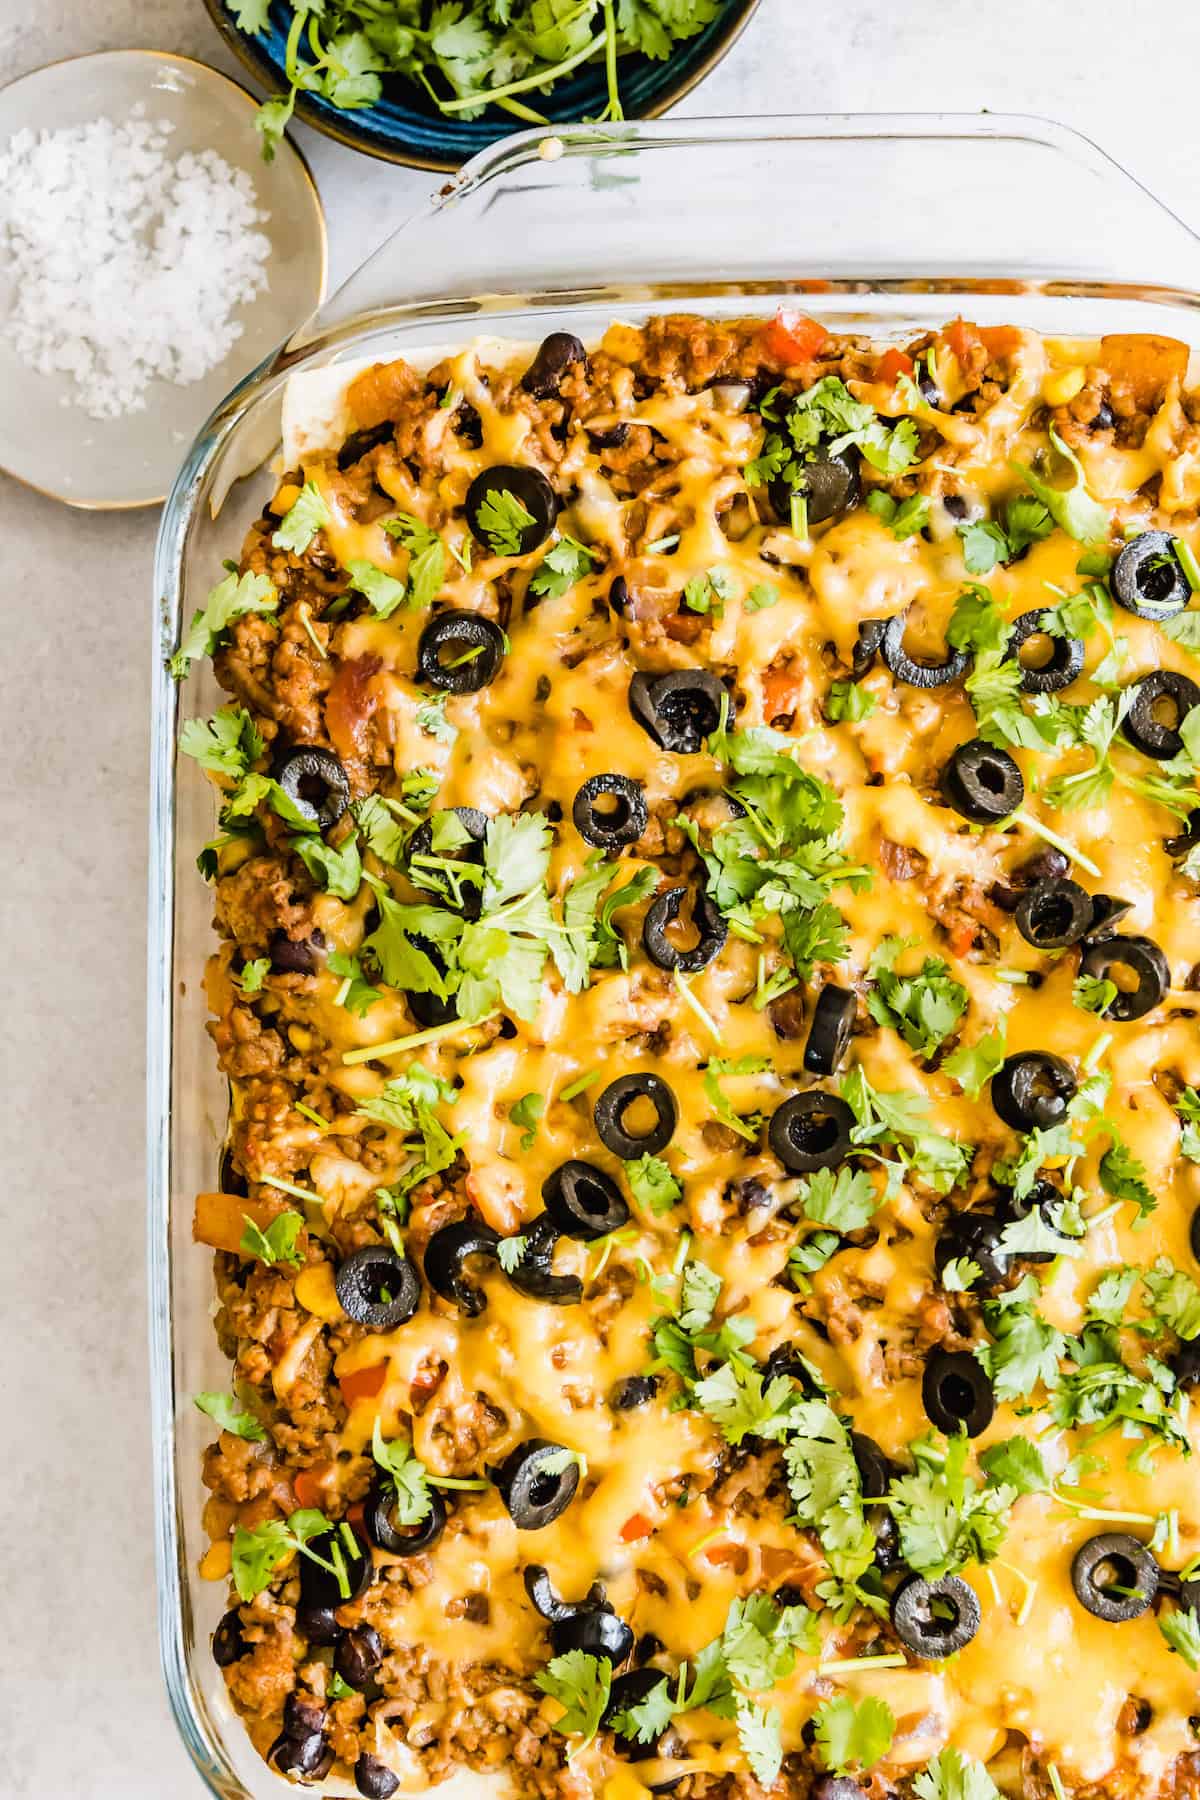 Overhead image of Mexican lasagna in a glass baking dish.